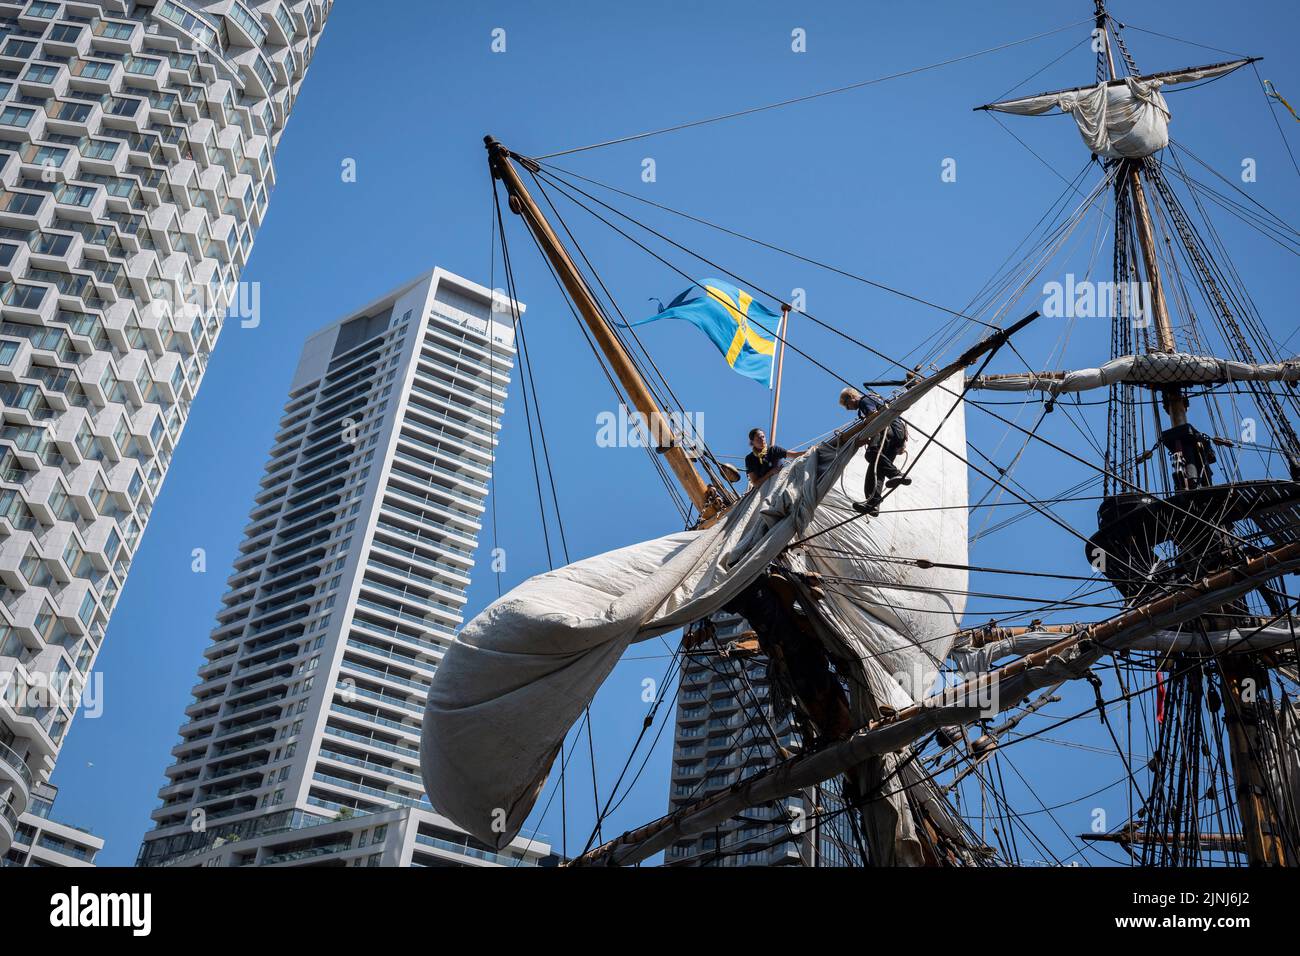 The crew of the replica sailing ship, Gotheborg, perform repairs and maintenance while docked beneath the high-rise towers at South Quay, Canary Wharf in London Docklands, during its four-day visit to the capital before it continues its two-year around the world expedition to Shanghai, China, on 9th August 2022, in London, England. Londoners are invited to tour the decks of this facsimile of the original ship which sank off the Swedish coast in 1745. Its main cargo would have been tea, porcelain, herbs and silk on the China route. Stock Photo